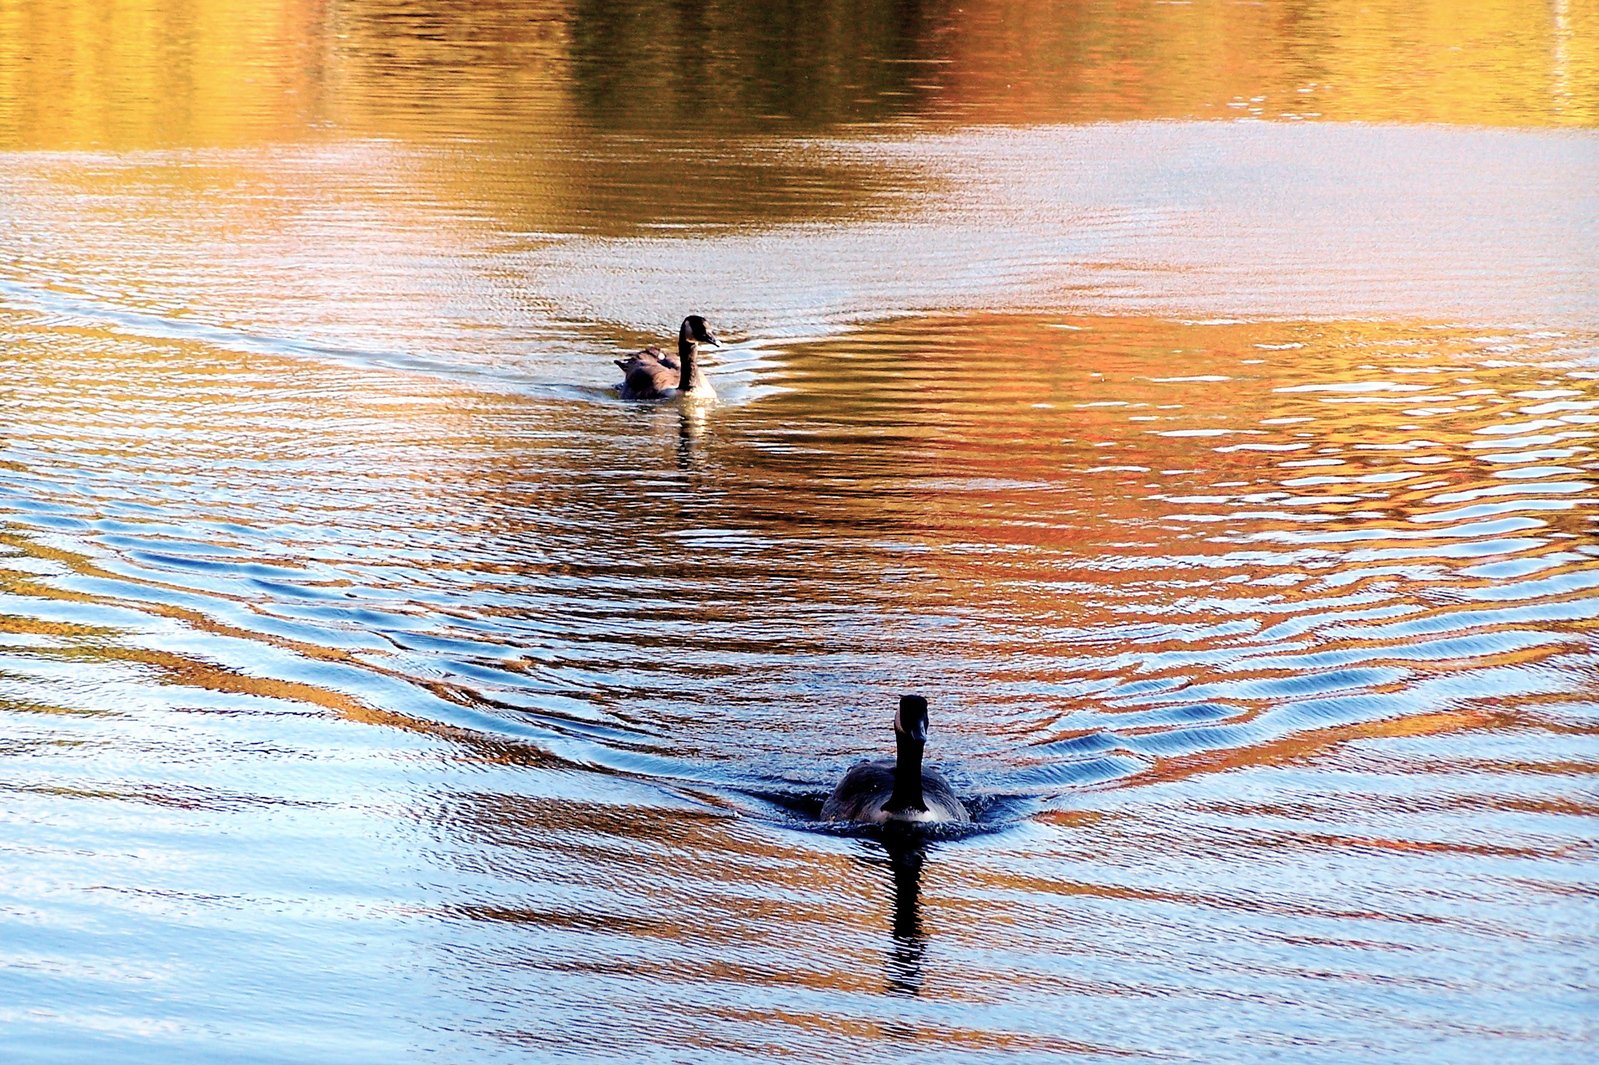 two birds swim in the lake, while surrounded by trees